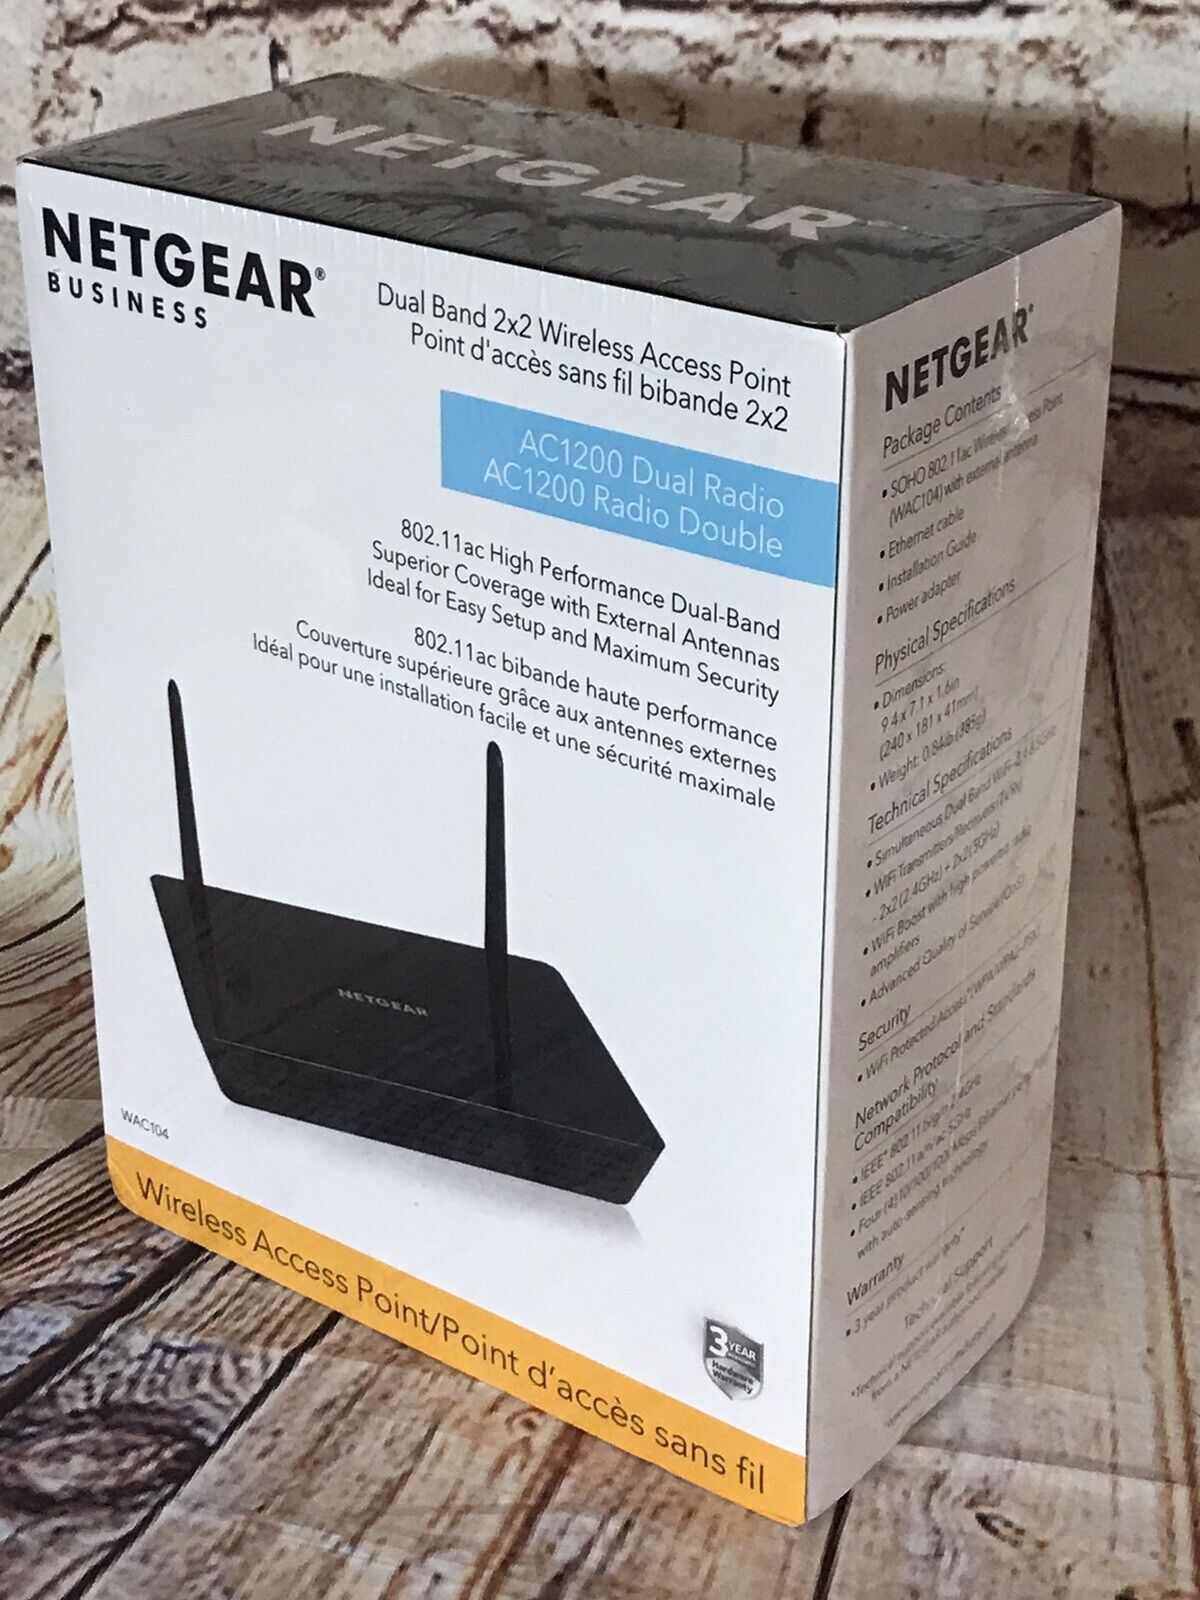 NETGEAR Business Dual Band Wireless Access Point Networking Device AC1200 Sealed